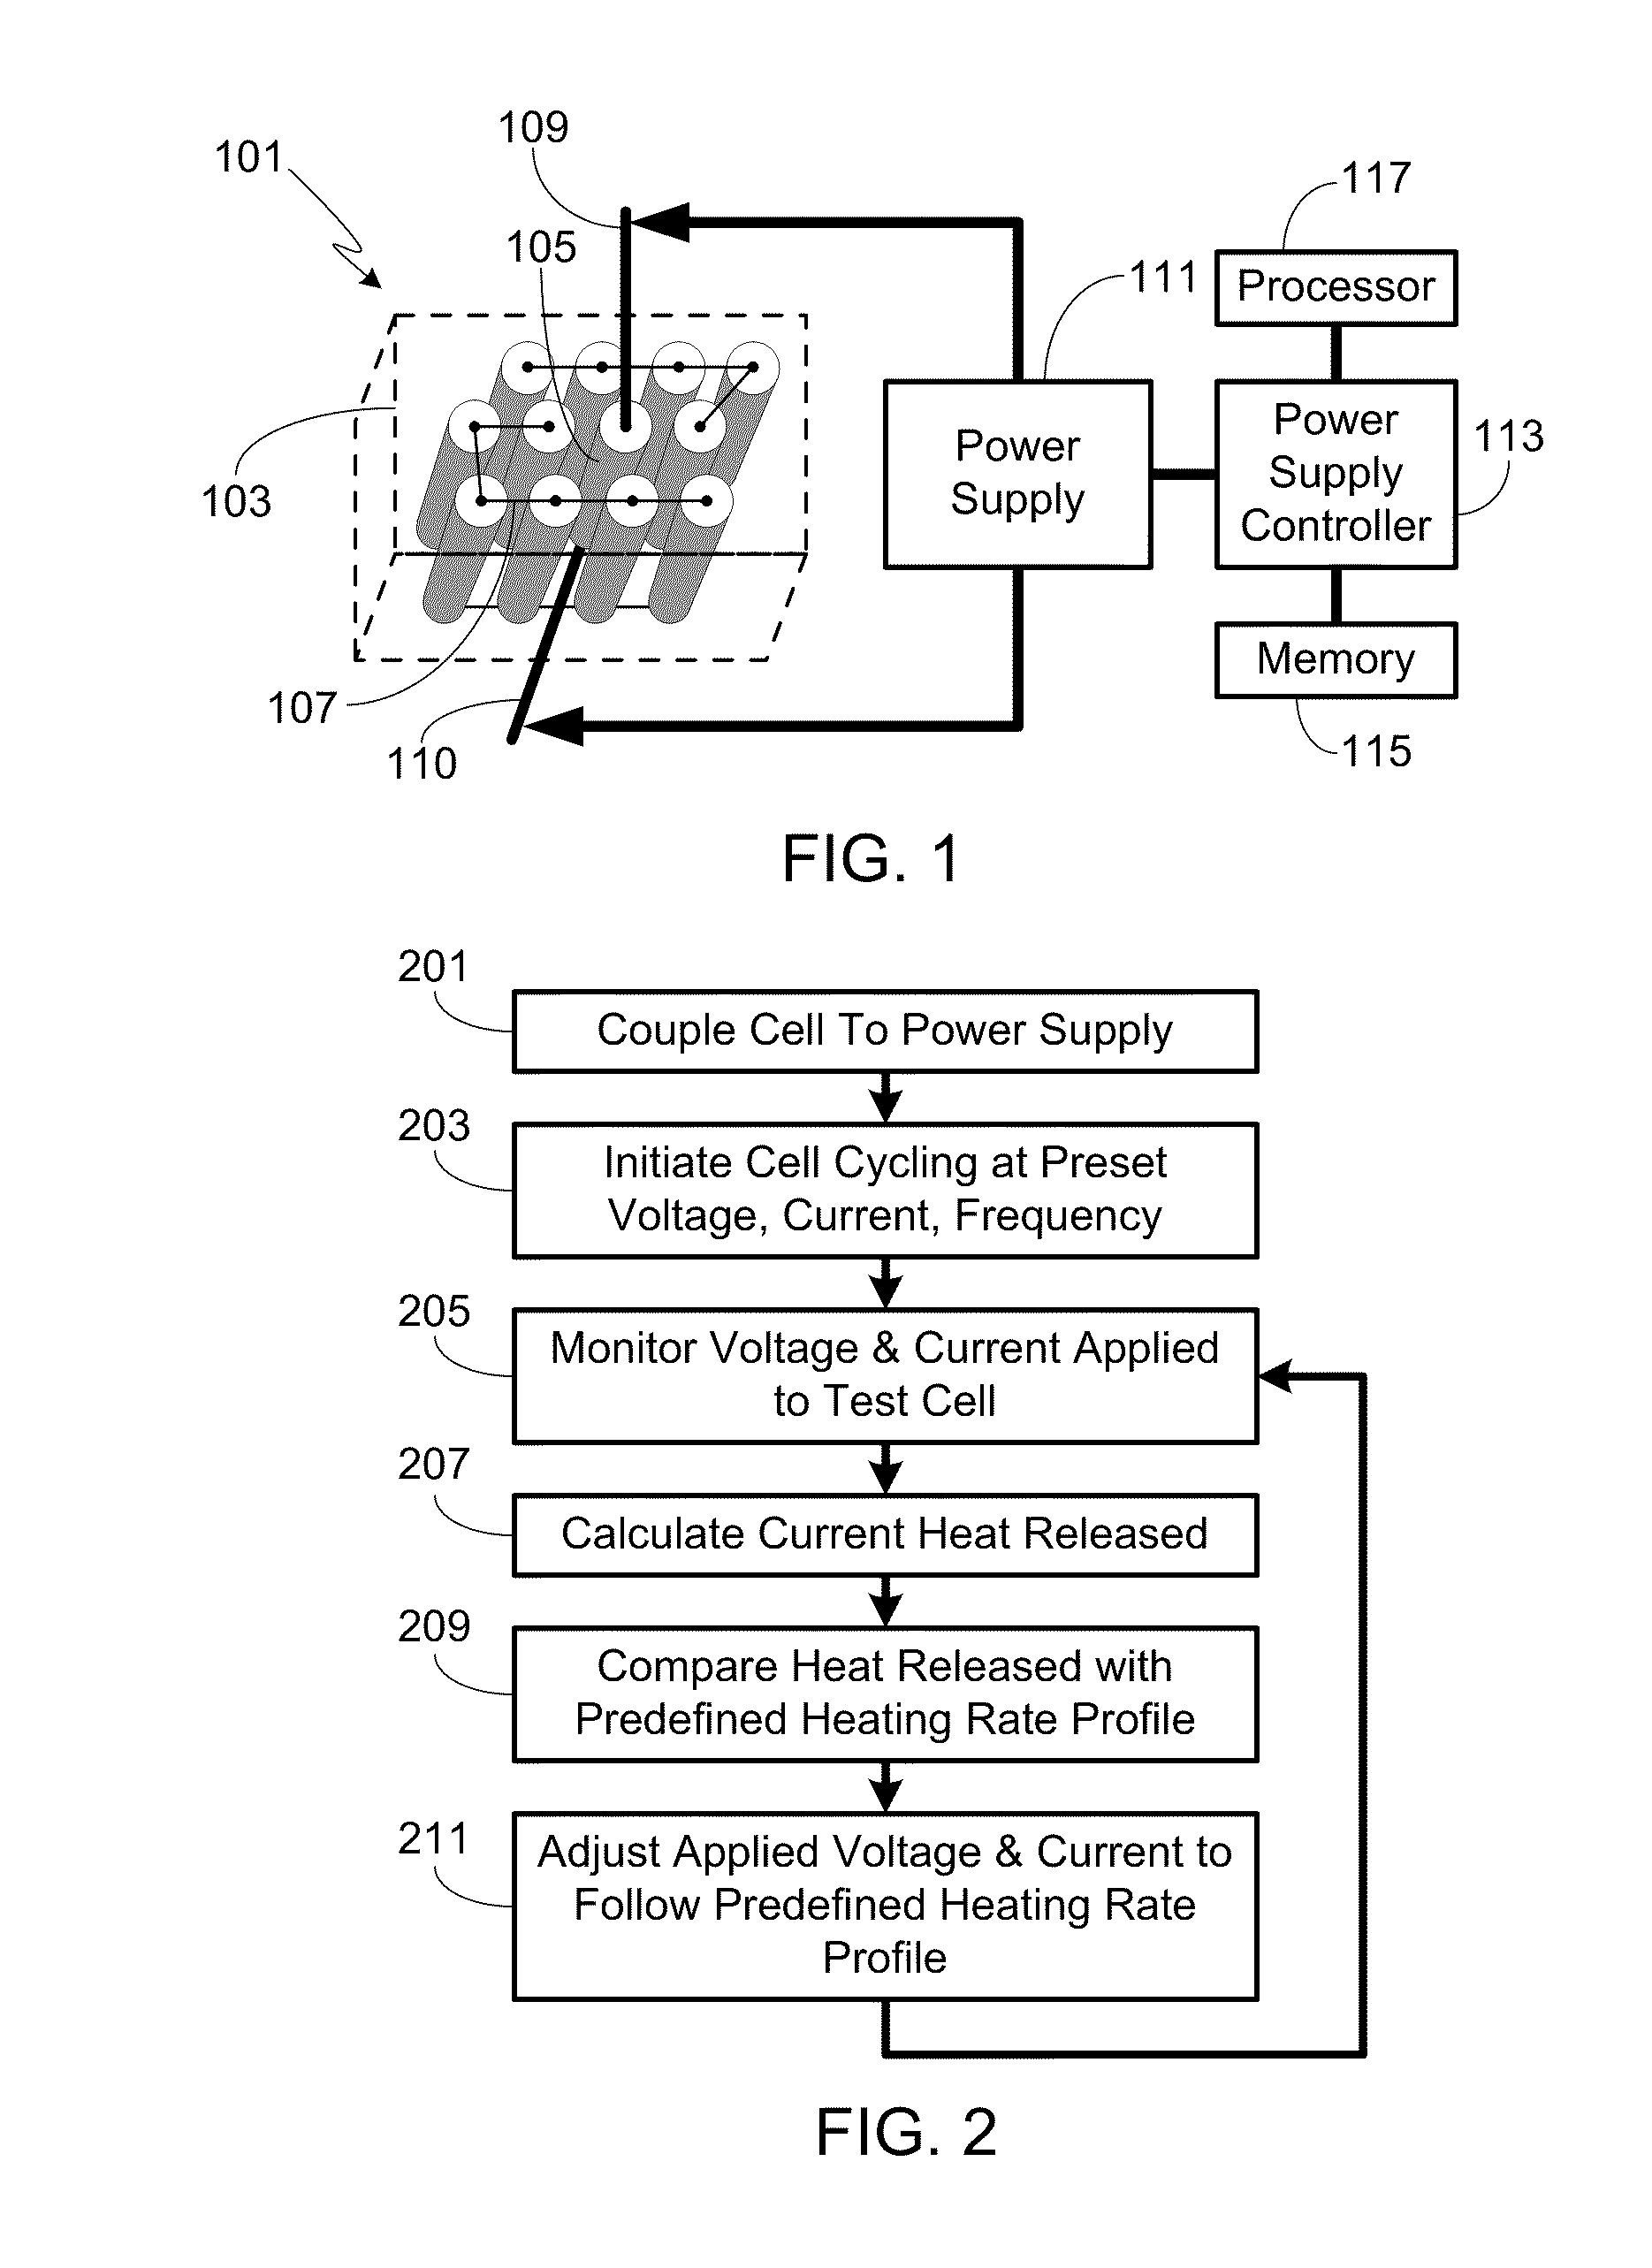 Method and Apparatus for Electrically Cycling a Battery Cell to Simulate an Internal Short